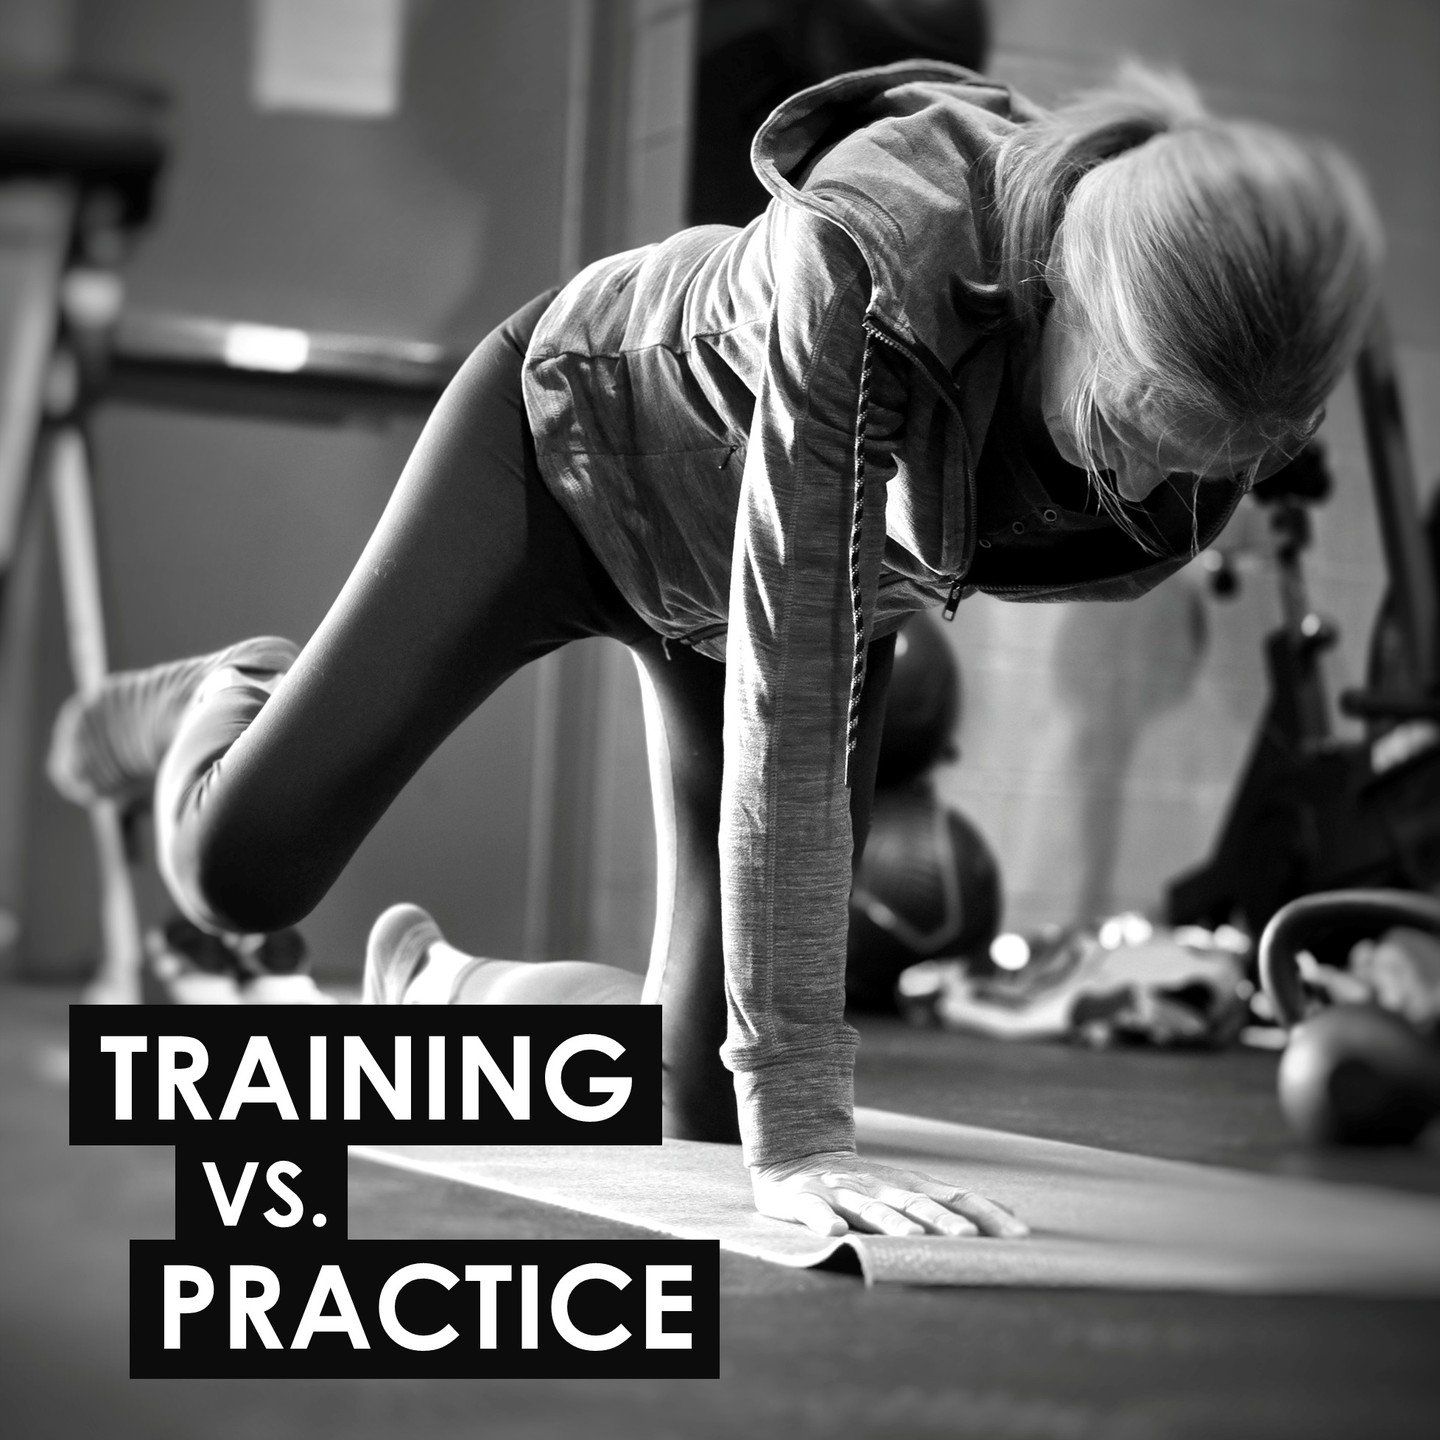 Training vs. Practice.

To acquire joint, muscle, and connective tissue capacity, TRAINING is needed.

To acquire more capability for your sport, daily activities, or performance, PRACTICE is needed.

These two are NOT the same.

TRAINING is putting 